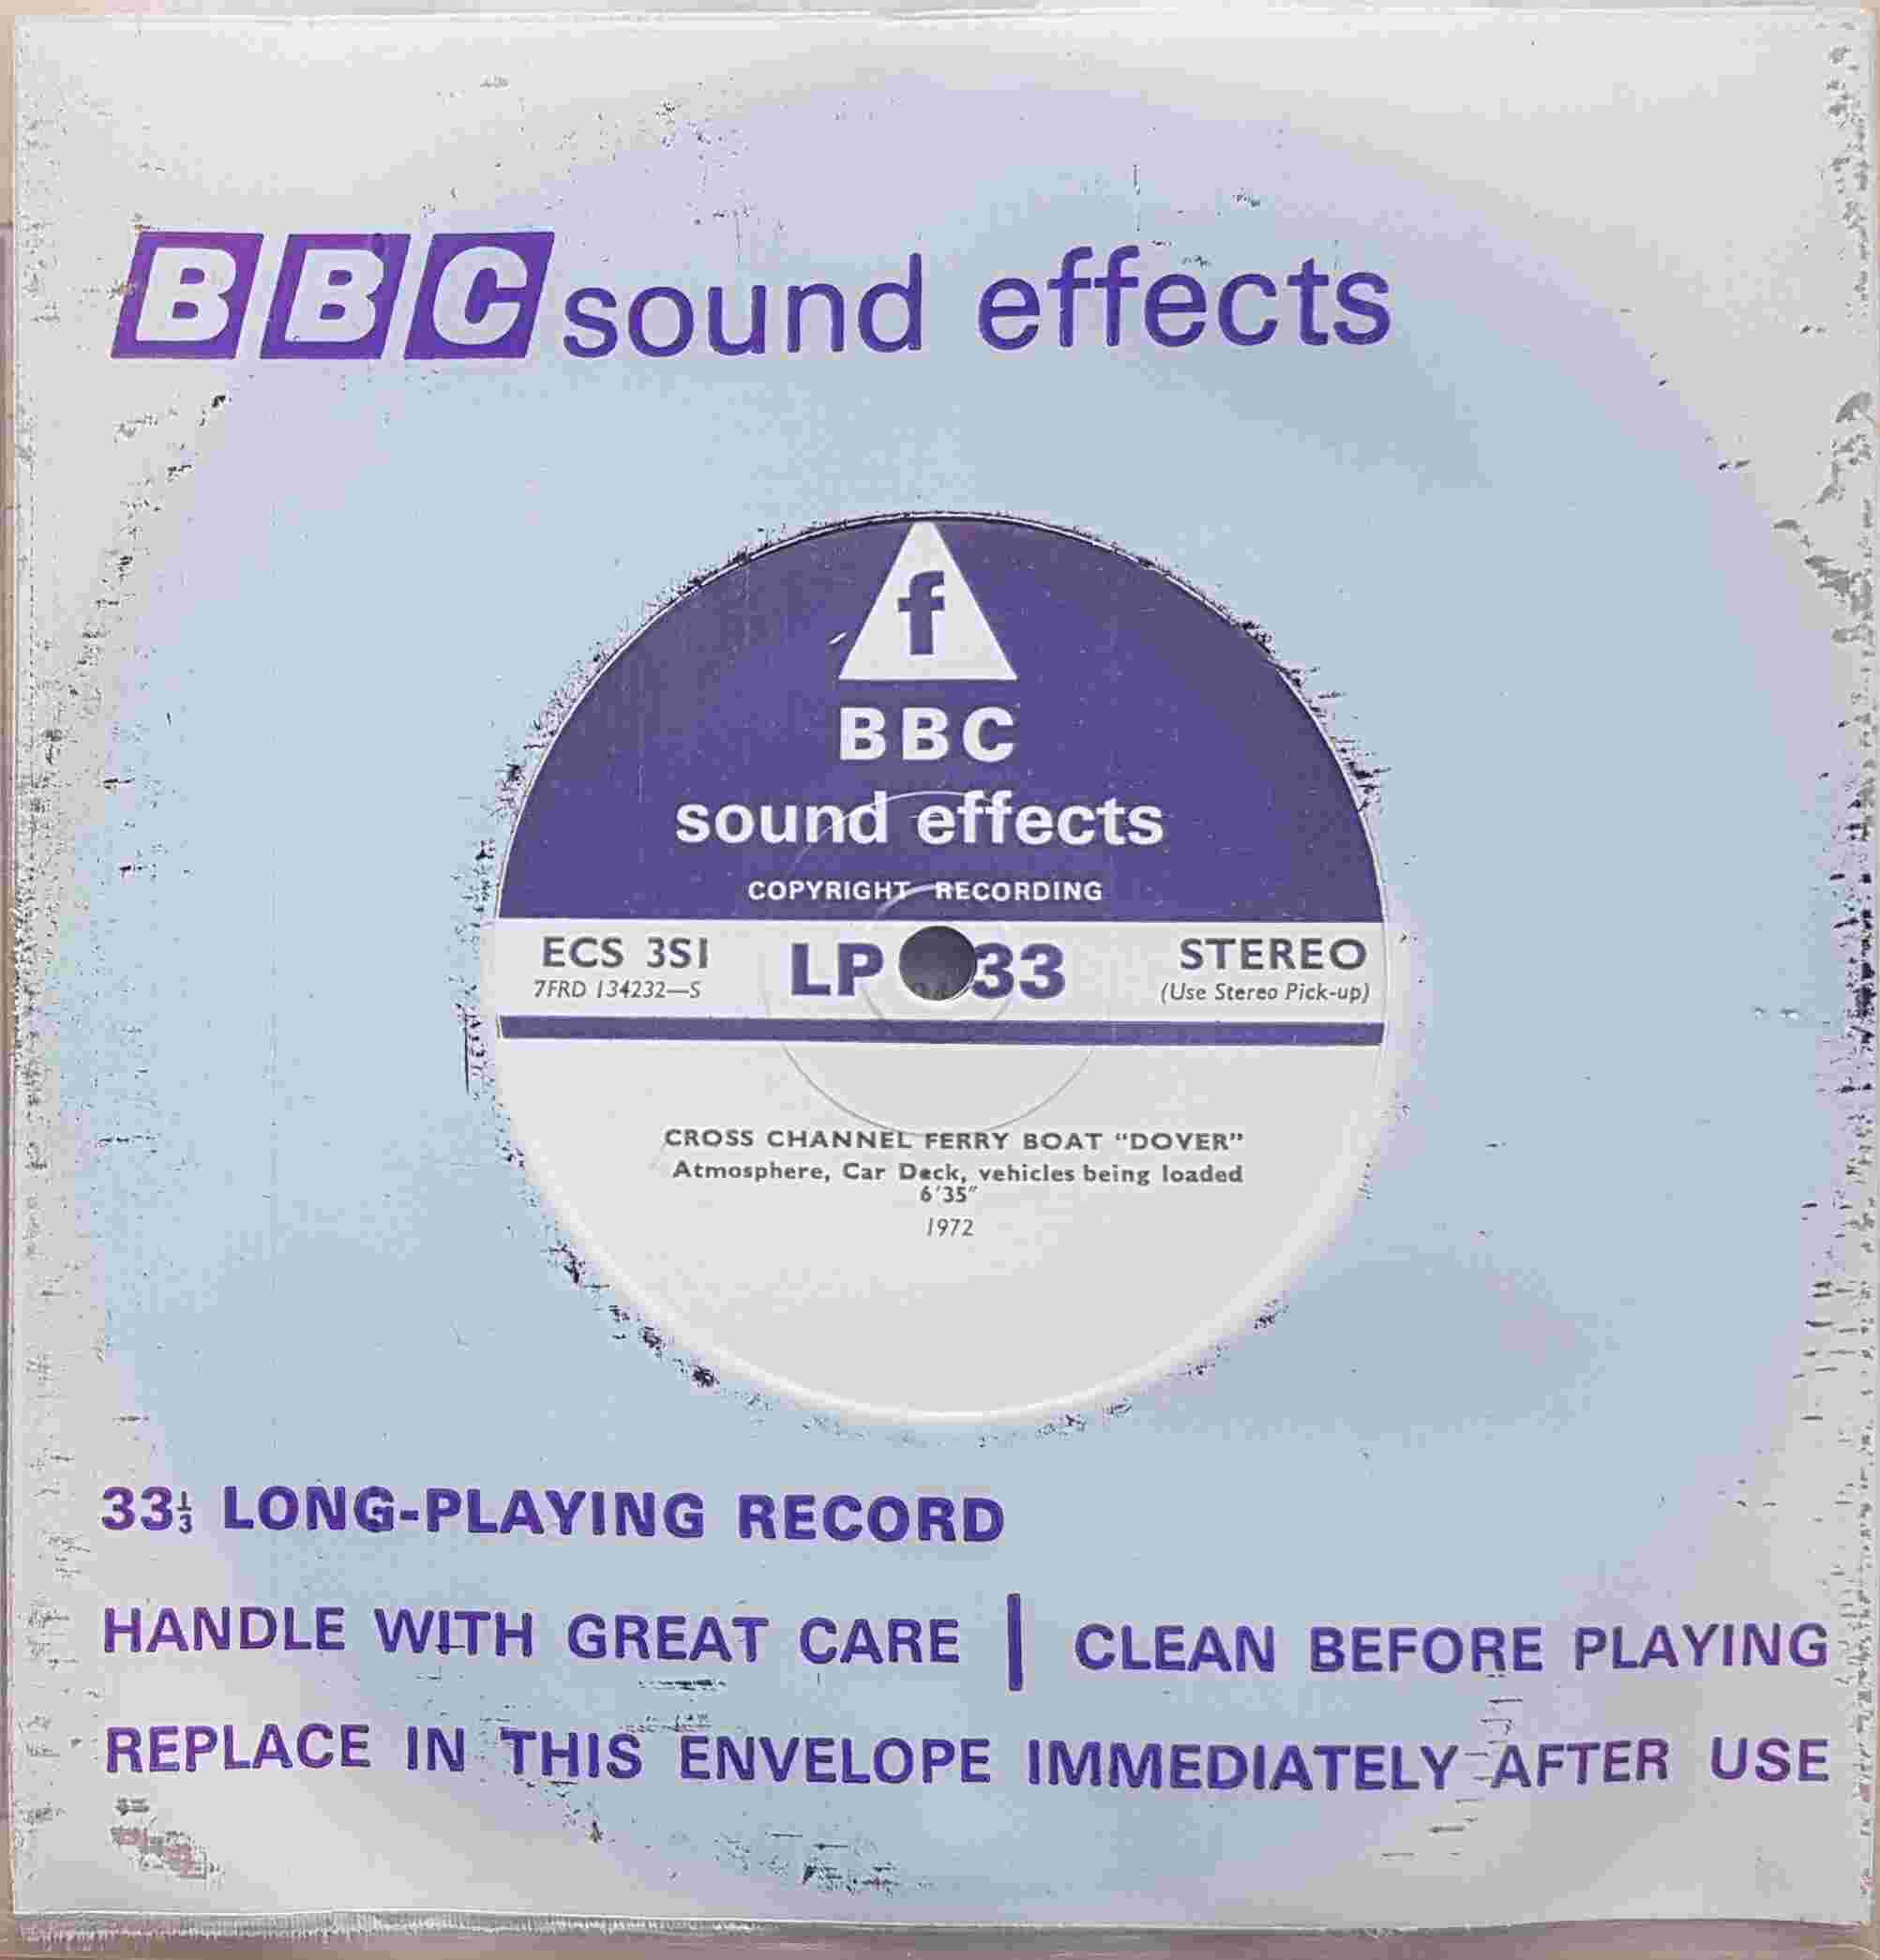 Picture of ECS 3S1 Cross-channel ferry boat 'Dover' by artist Not registered from the BBC singles - Records and Tapes library